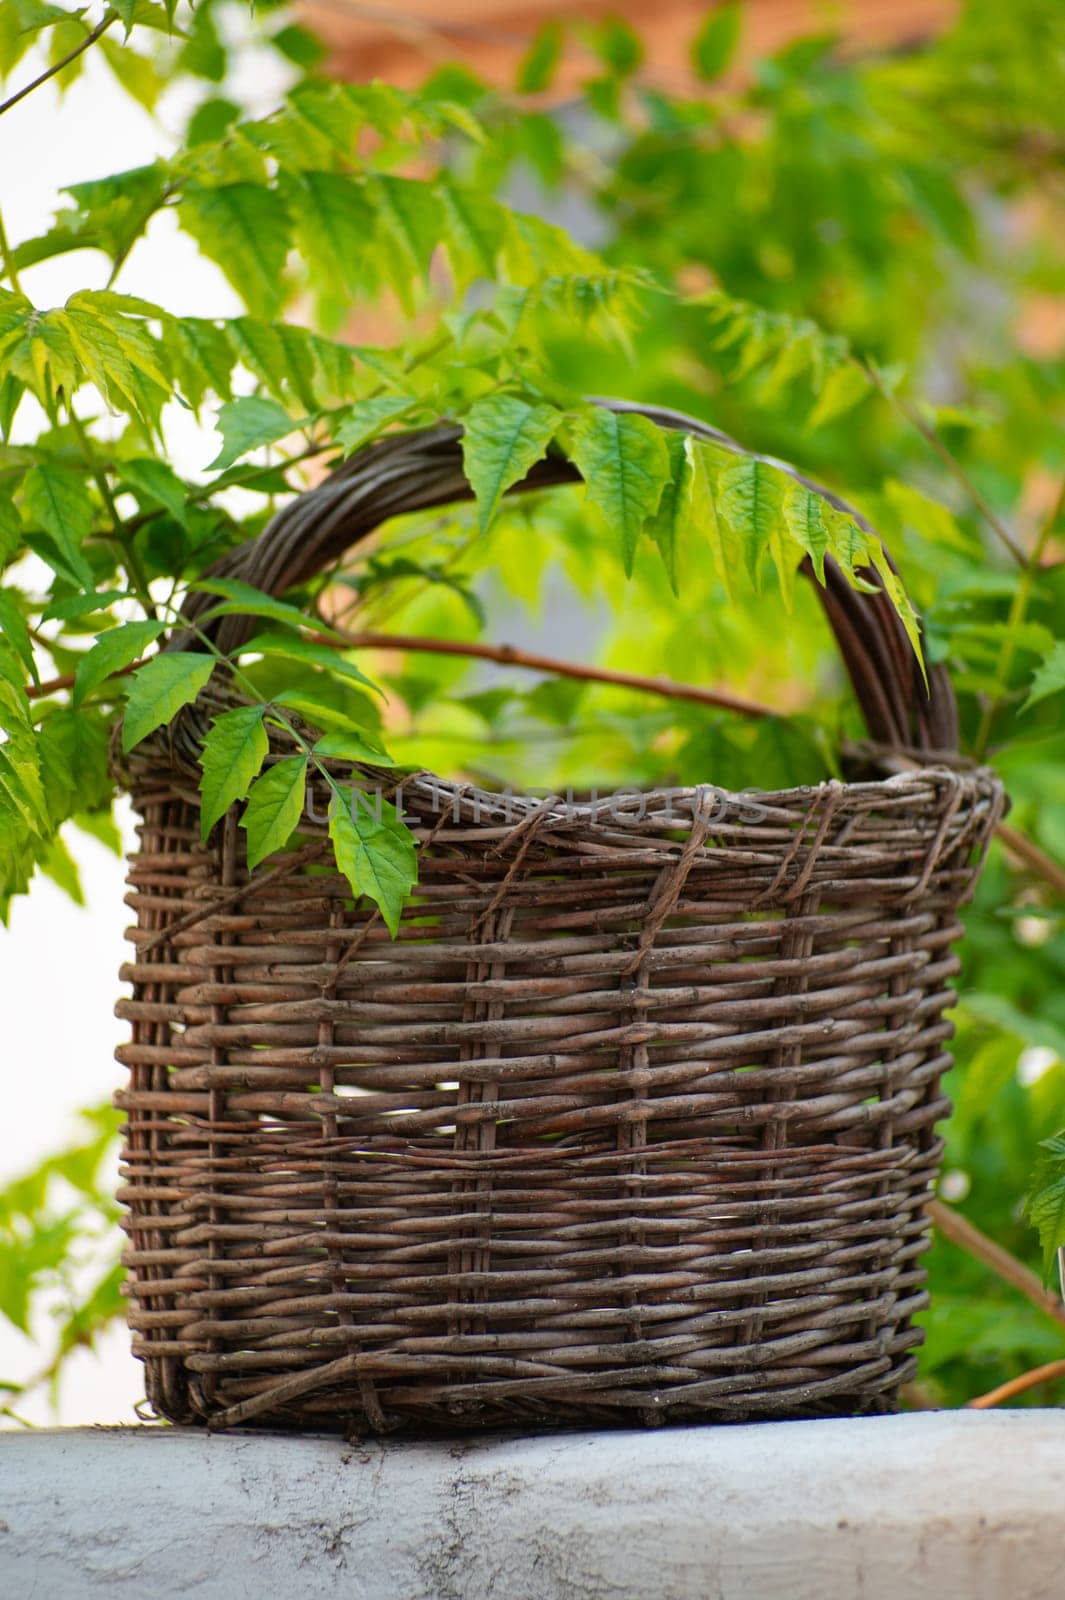 A wicker basket in the backyard garden with branch with green leaves on the foreground. Gardening concept